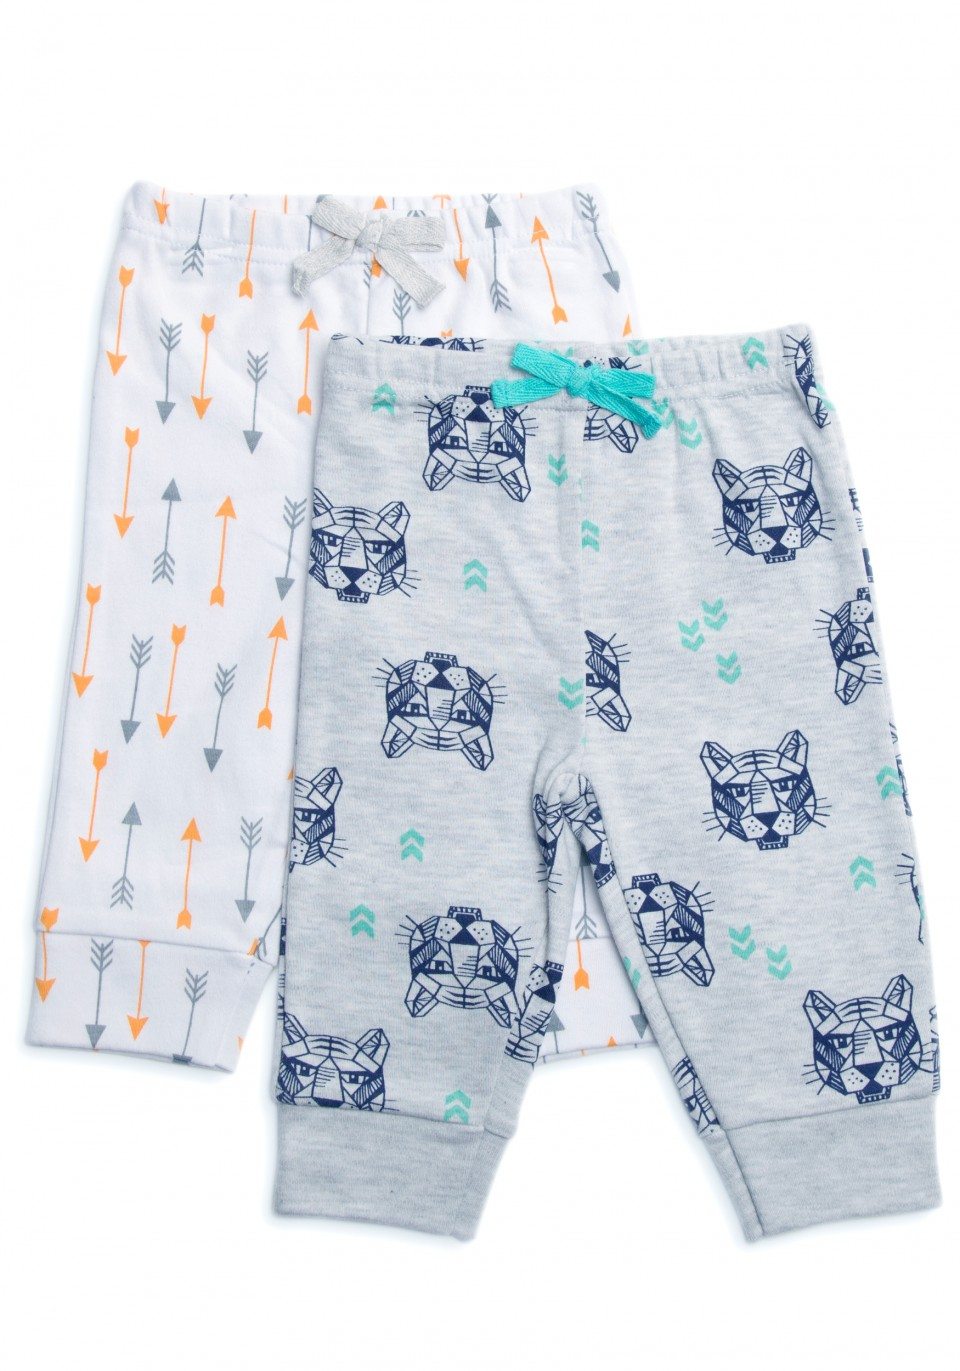 Rosie Pope Baby 2 pack Pants - Arrow/Tiger Combo